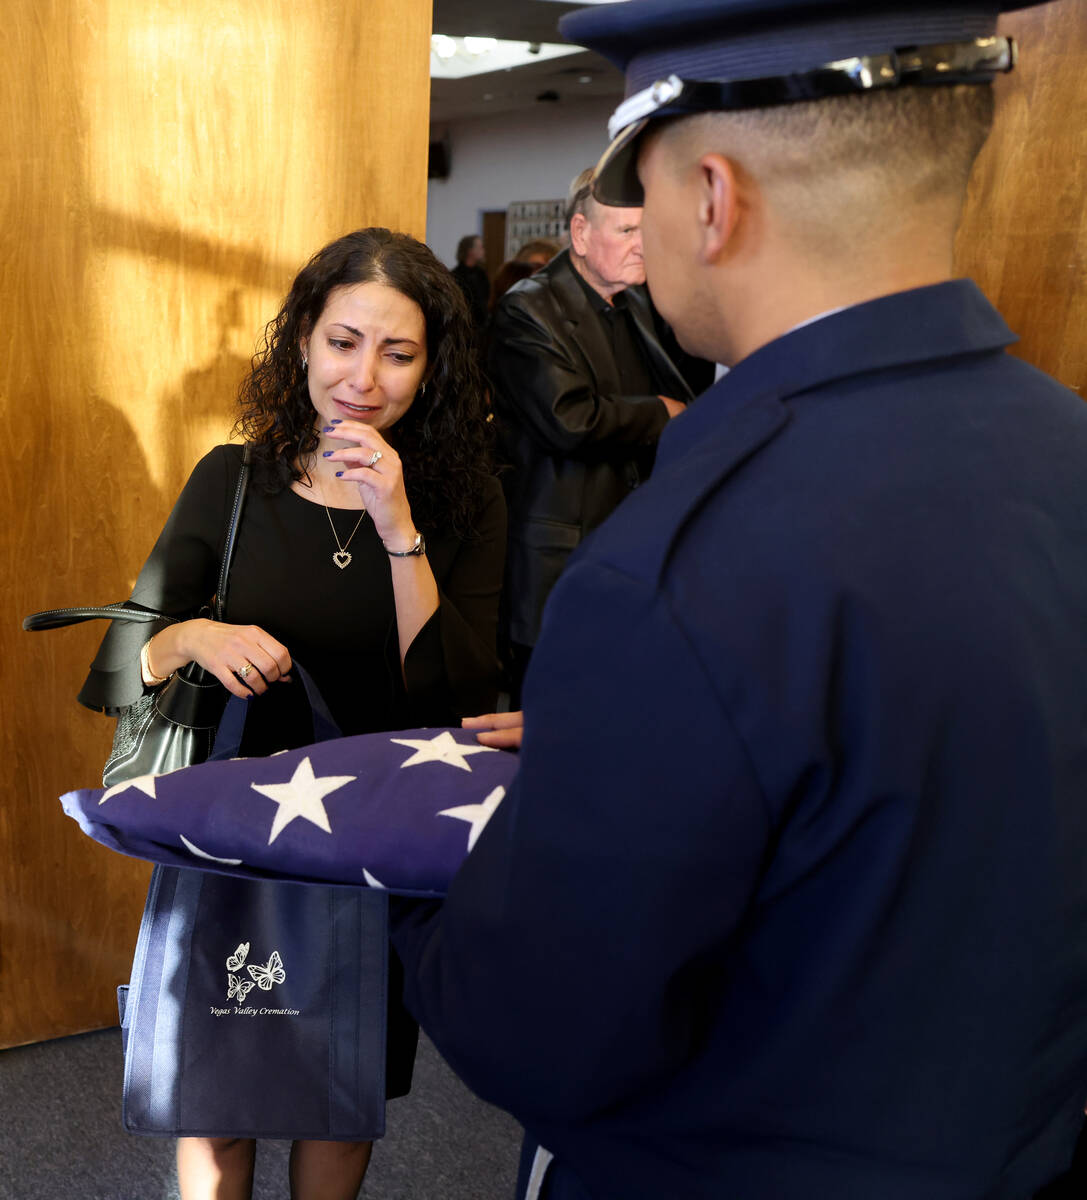 Lorraine Mannarino, who was like a daughter to Ed Hall, reacts to his flag during a memorial se ...